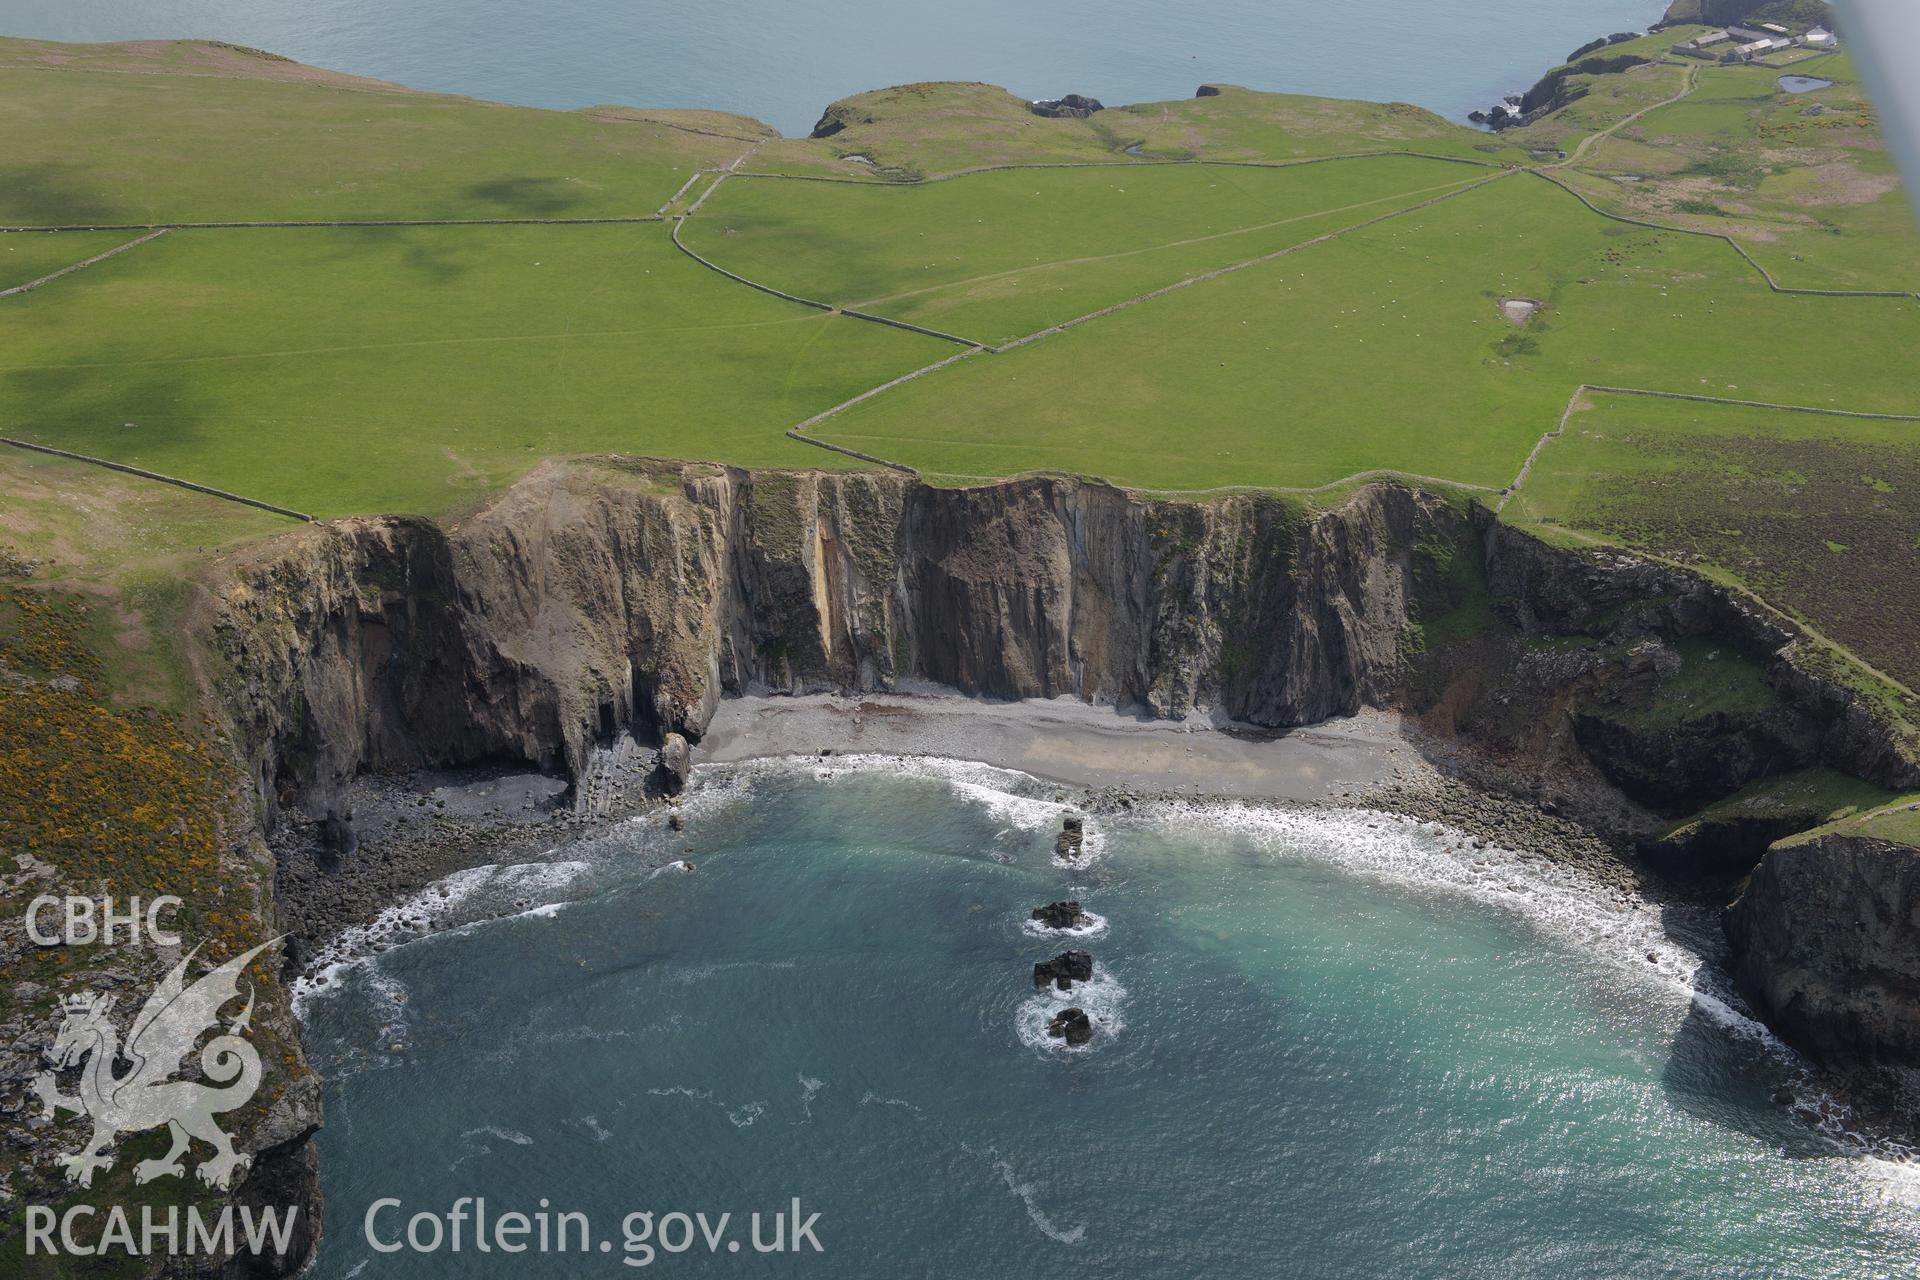 Ramsey Island, off the coast near St Davids. Oblique aerial photograph taken during the Royal Commission's programme of archaeological aerial reconnaissance by Toby Driver on 13th May 2015.